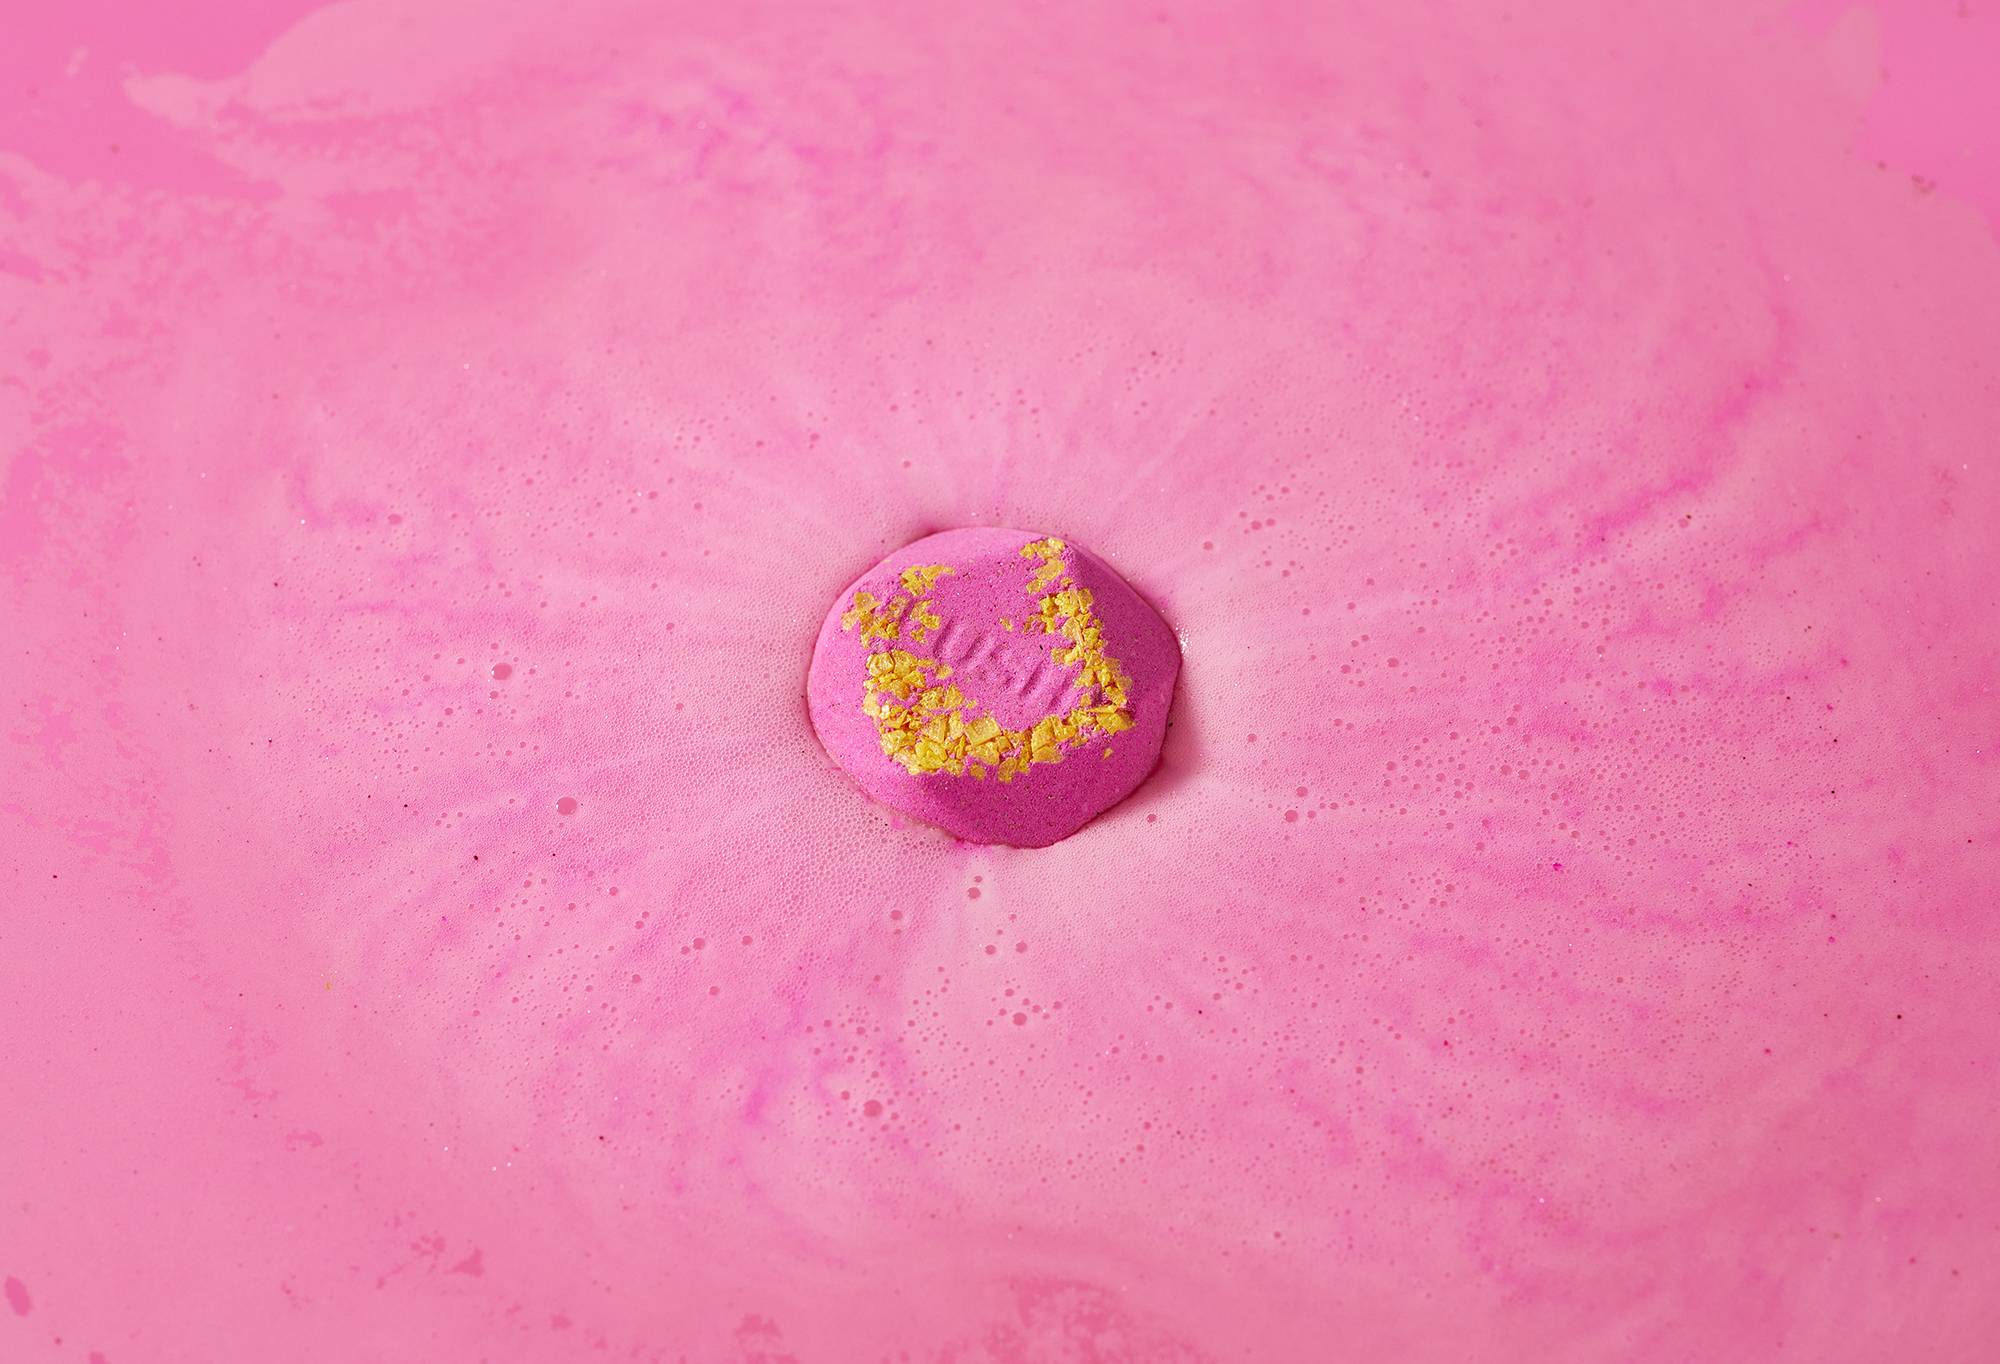 San San bath bomb sits on a sea of hot pink swirling foam with small pressed yellow-coloured salt and "Lush" embossed on top.